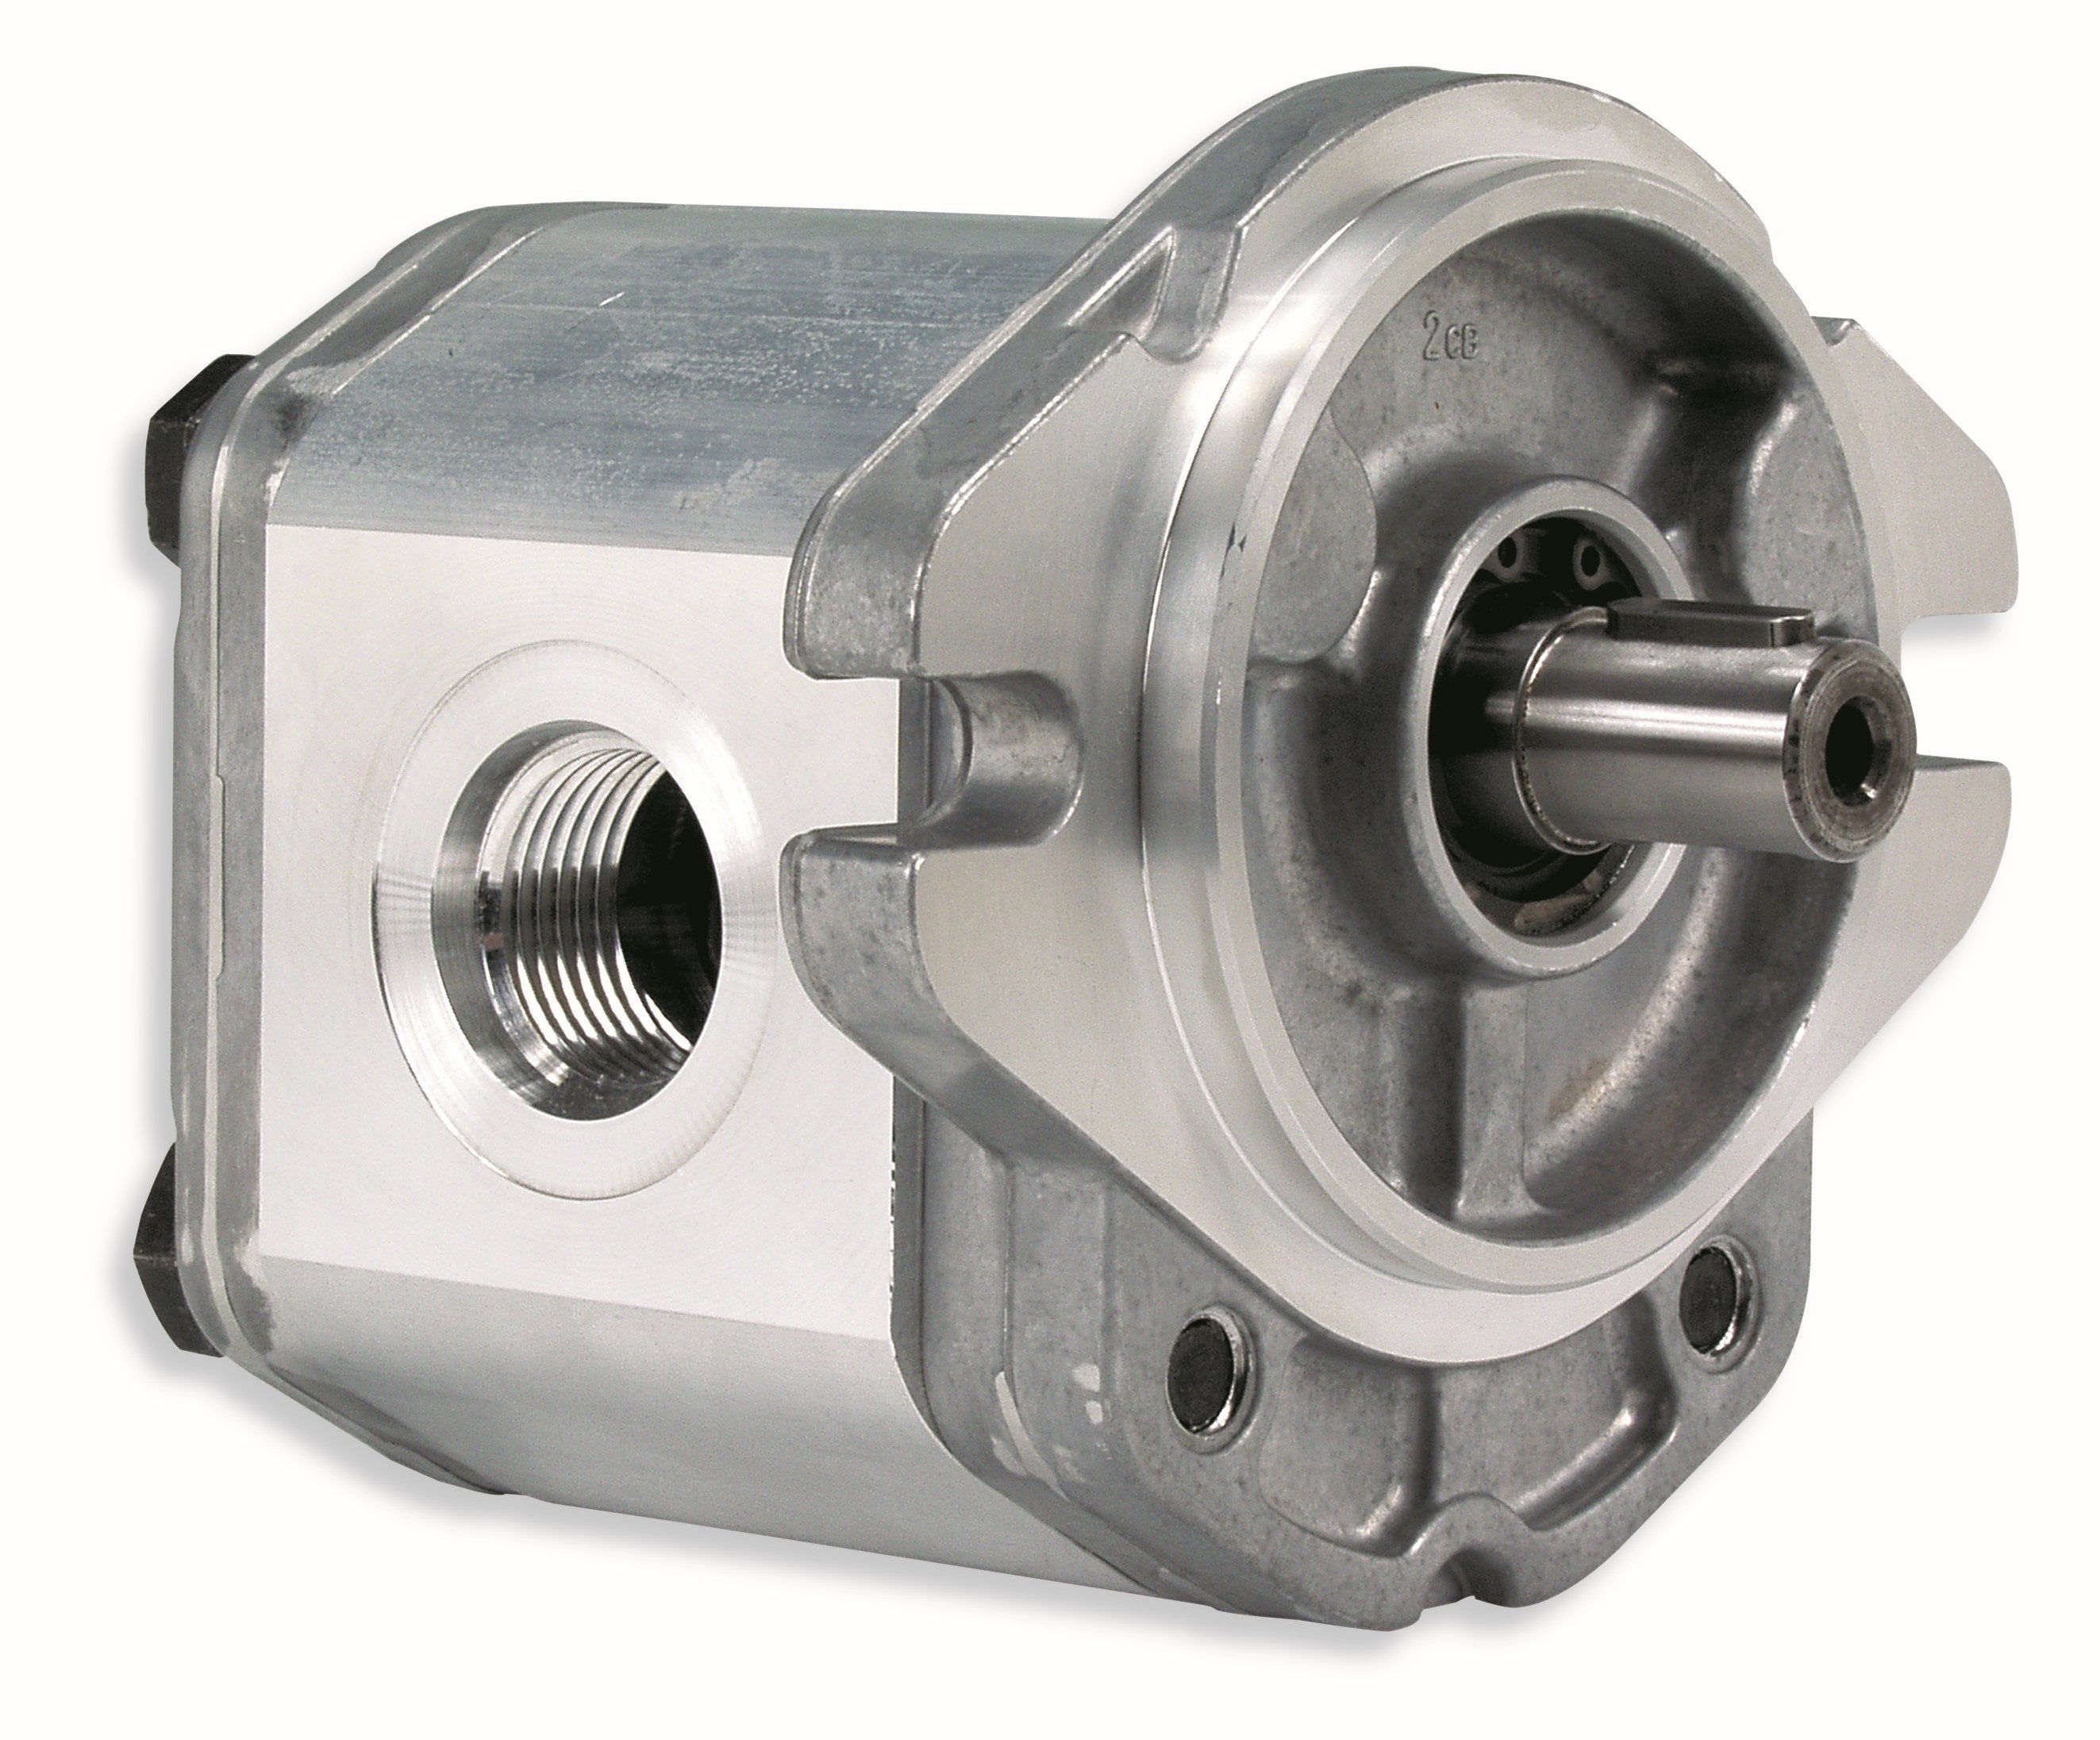 ALM2A-R-40-E2 : Marzocchi Gear Motor, Bidirectional, 28.2cc, 2465psi rated, 1800RPM, 0.75 (3/4") #12 SAE ports, 5/8" Bore x 5/32" Keyed Shaft